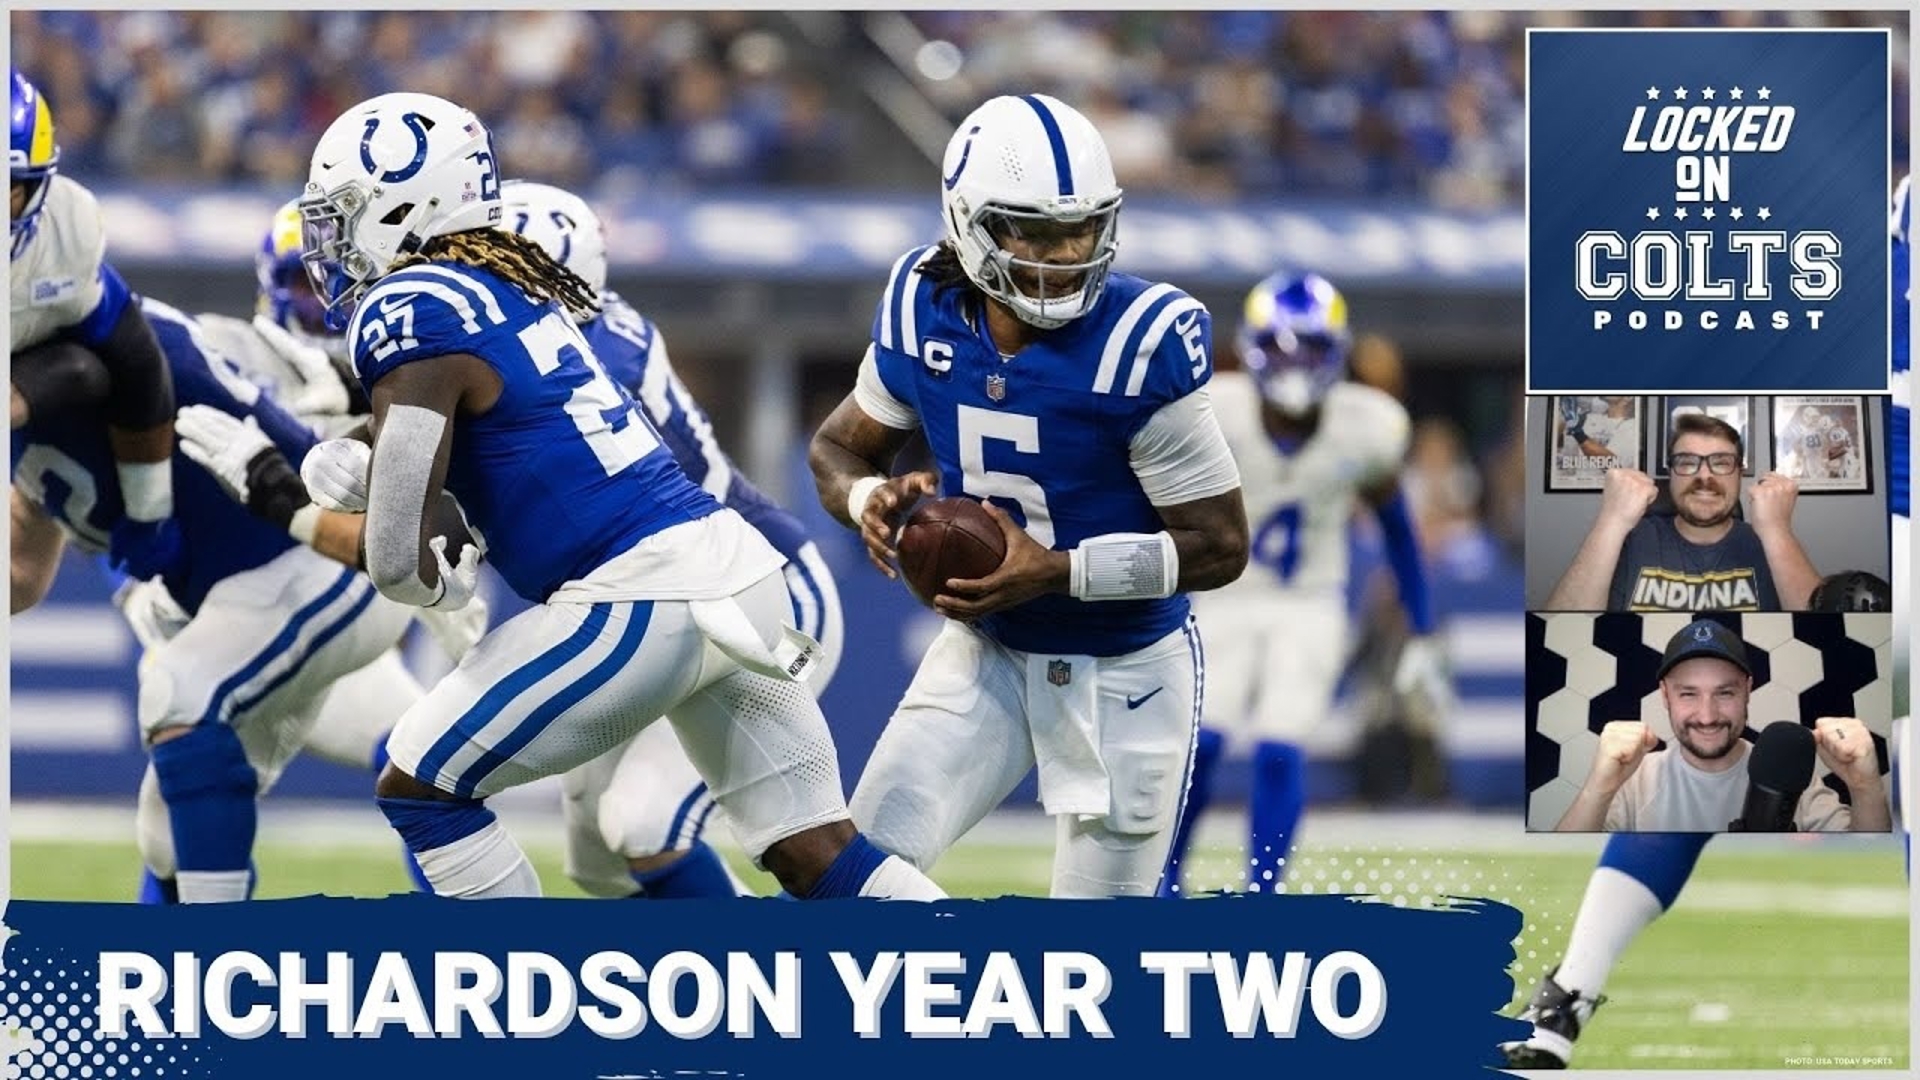 Indianapolis Colts quarterback Anthony Richardson is set up for success in year two... he just needs to stay healthy.